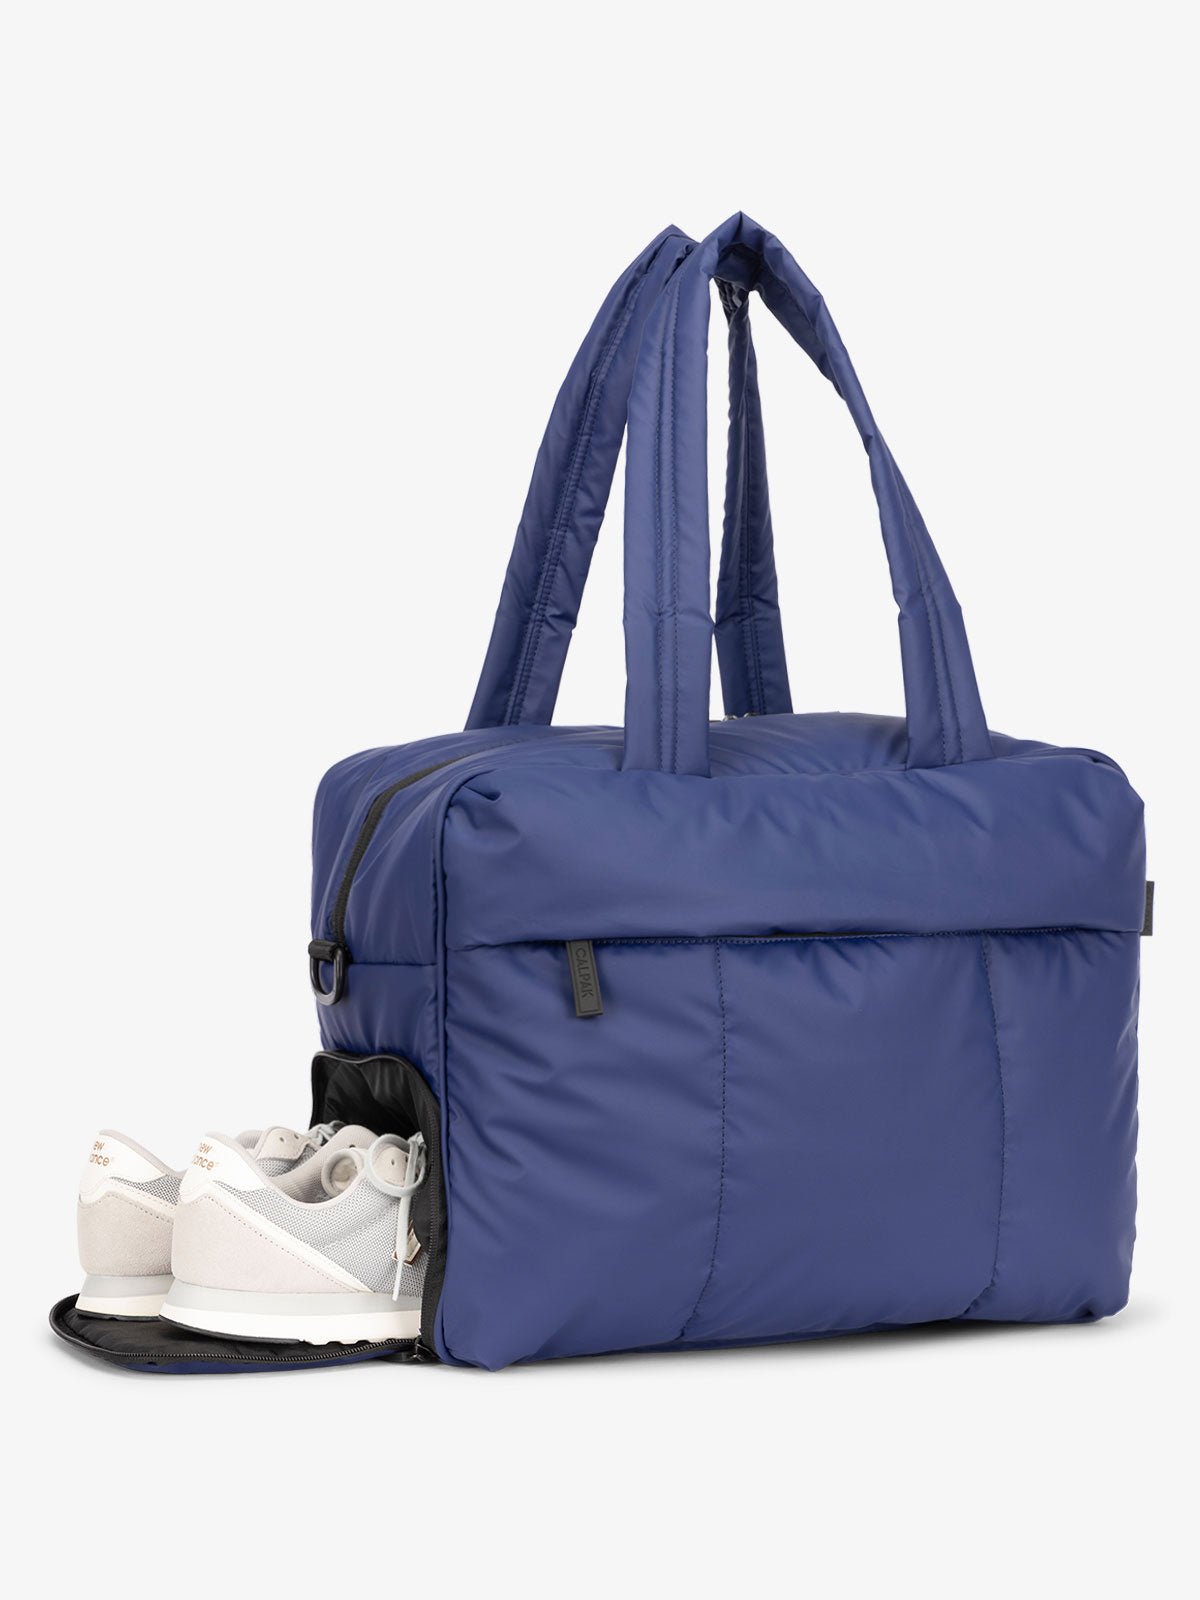 shoe compartment for Luka Duffel Bag in dark blue navy